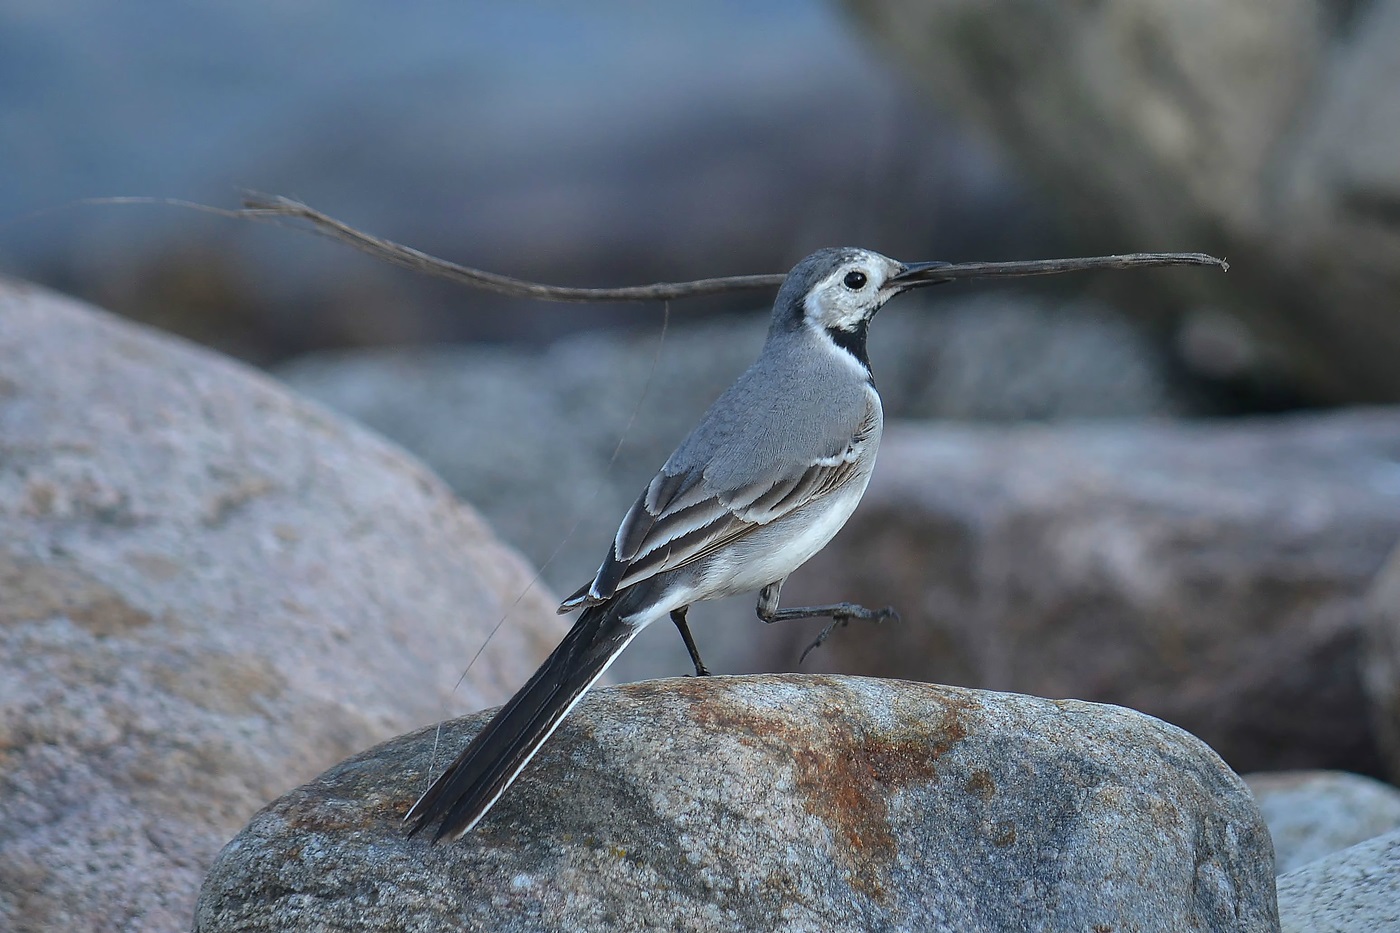 Wagtail collects materials for the construction of the nest